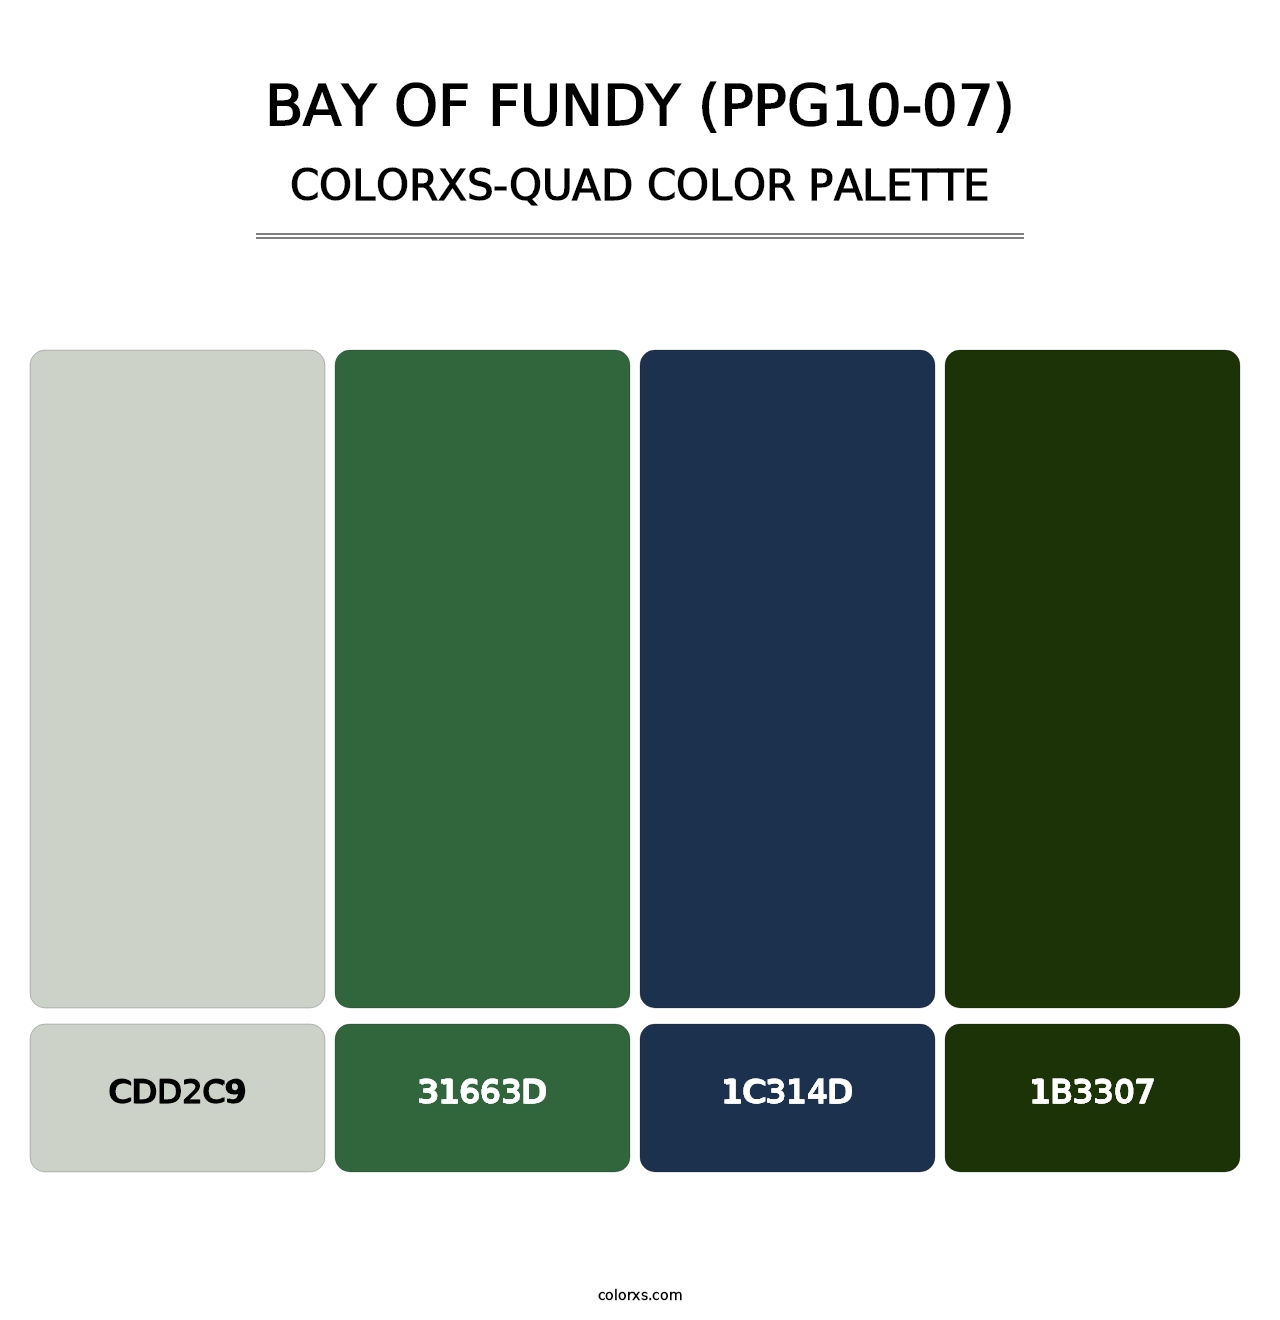 Bay Of Fundy (PPG10-07) - Colorxs Quad Palette